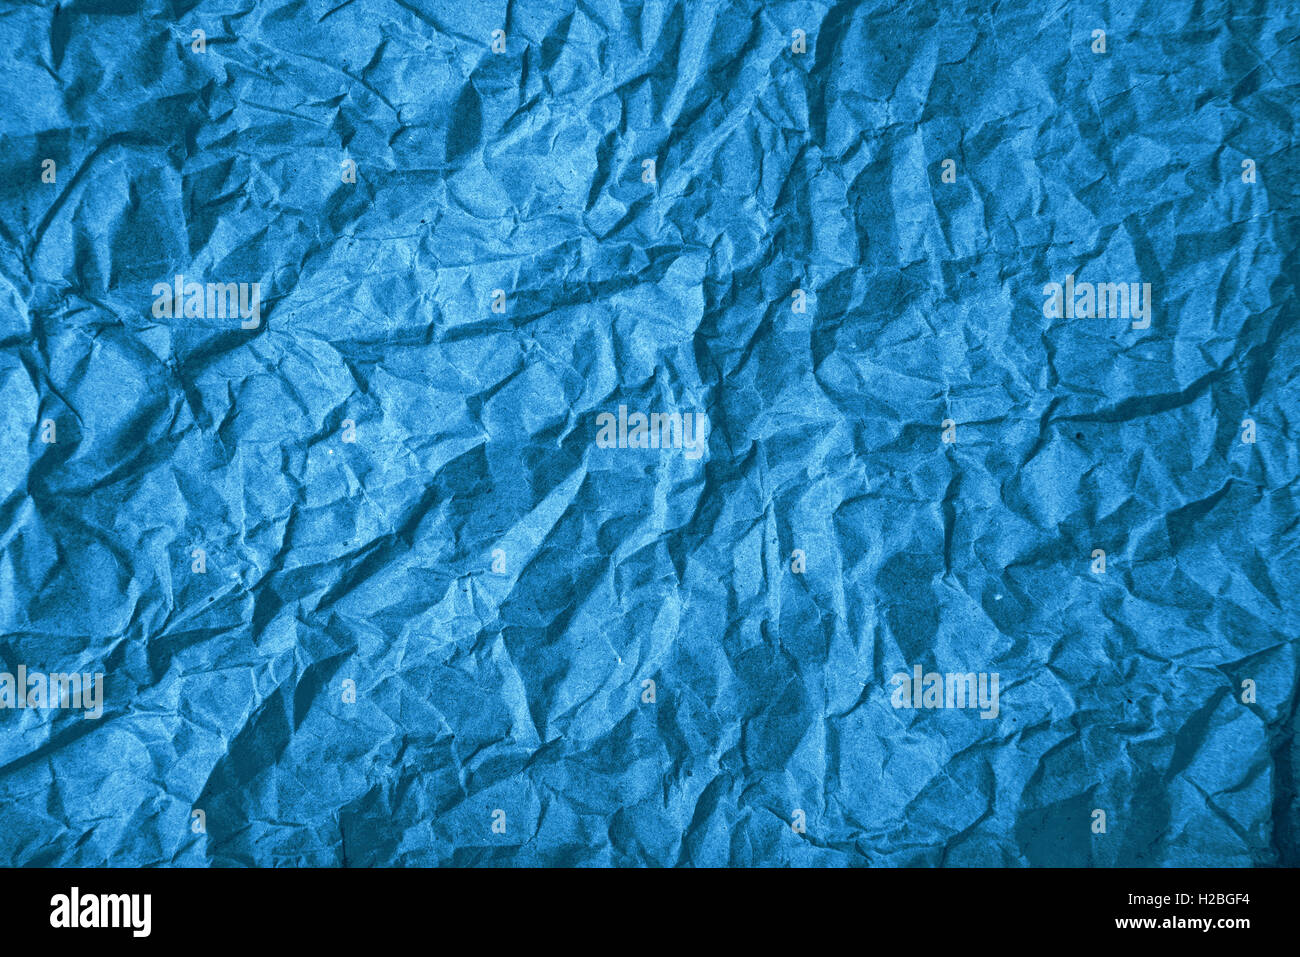 Crumpled Blue Paper Texture Picture, Free Photograph